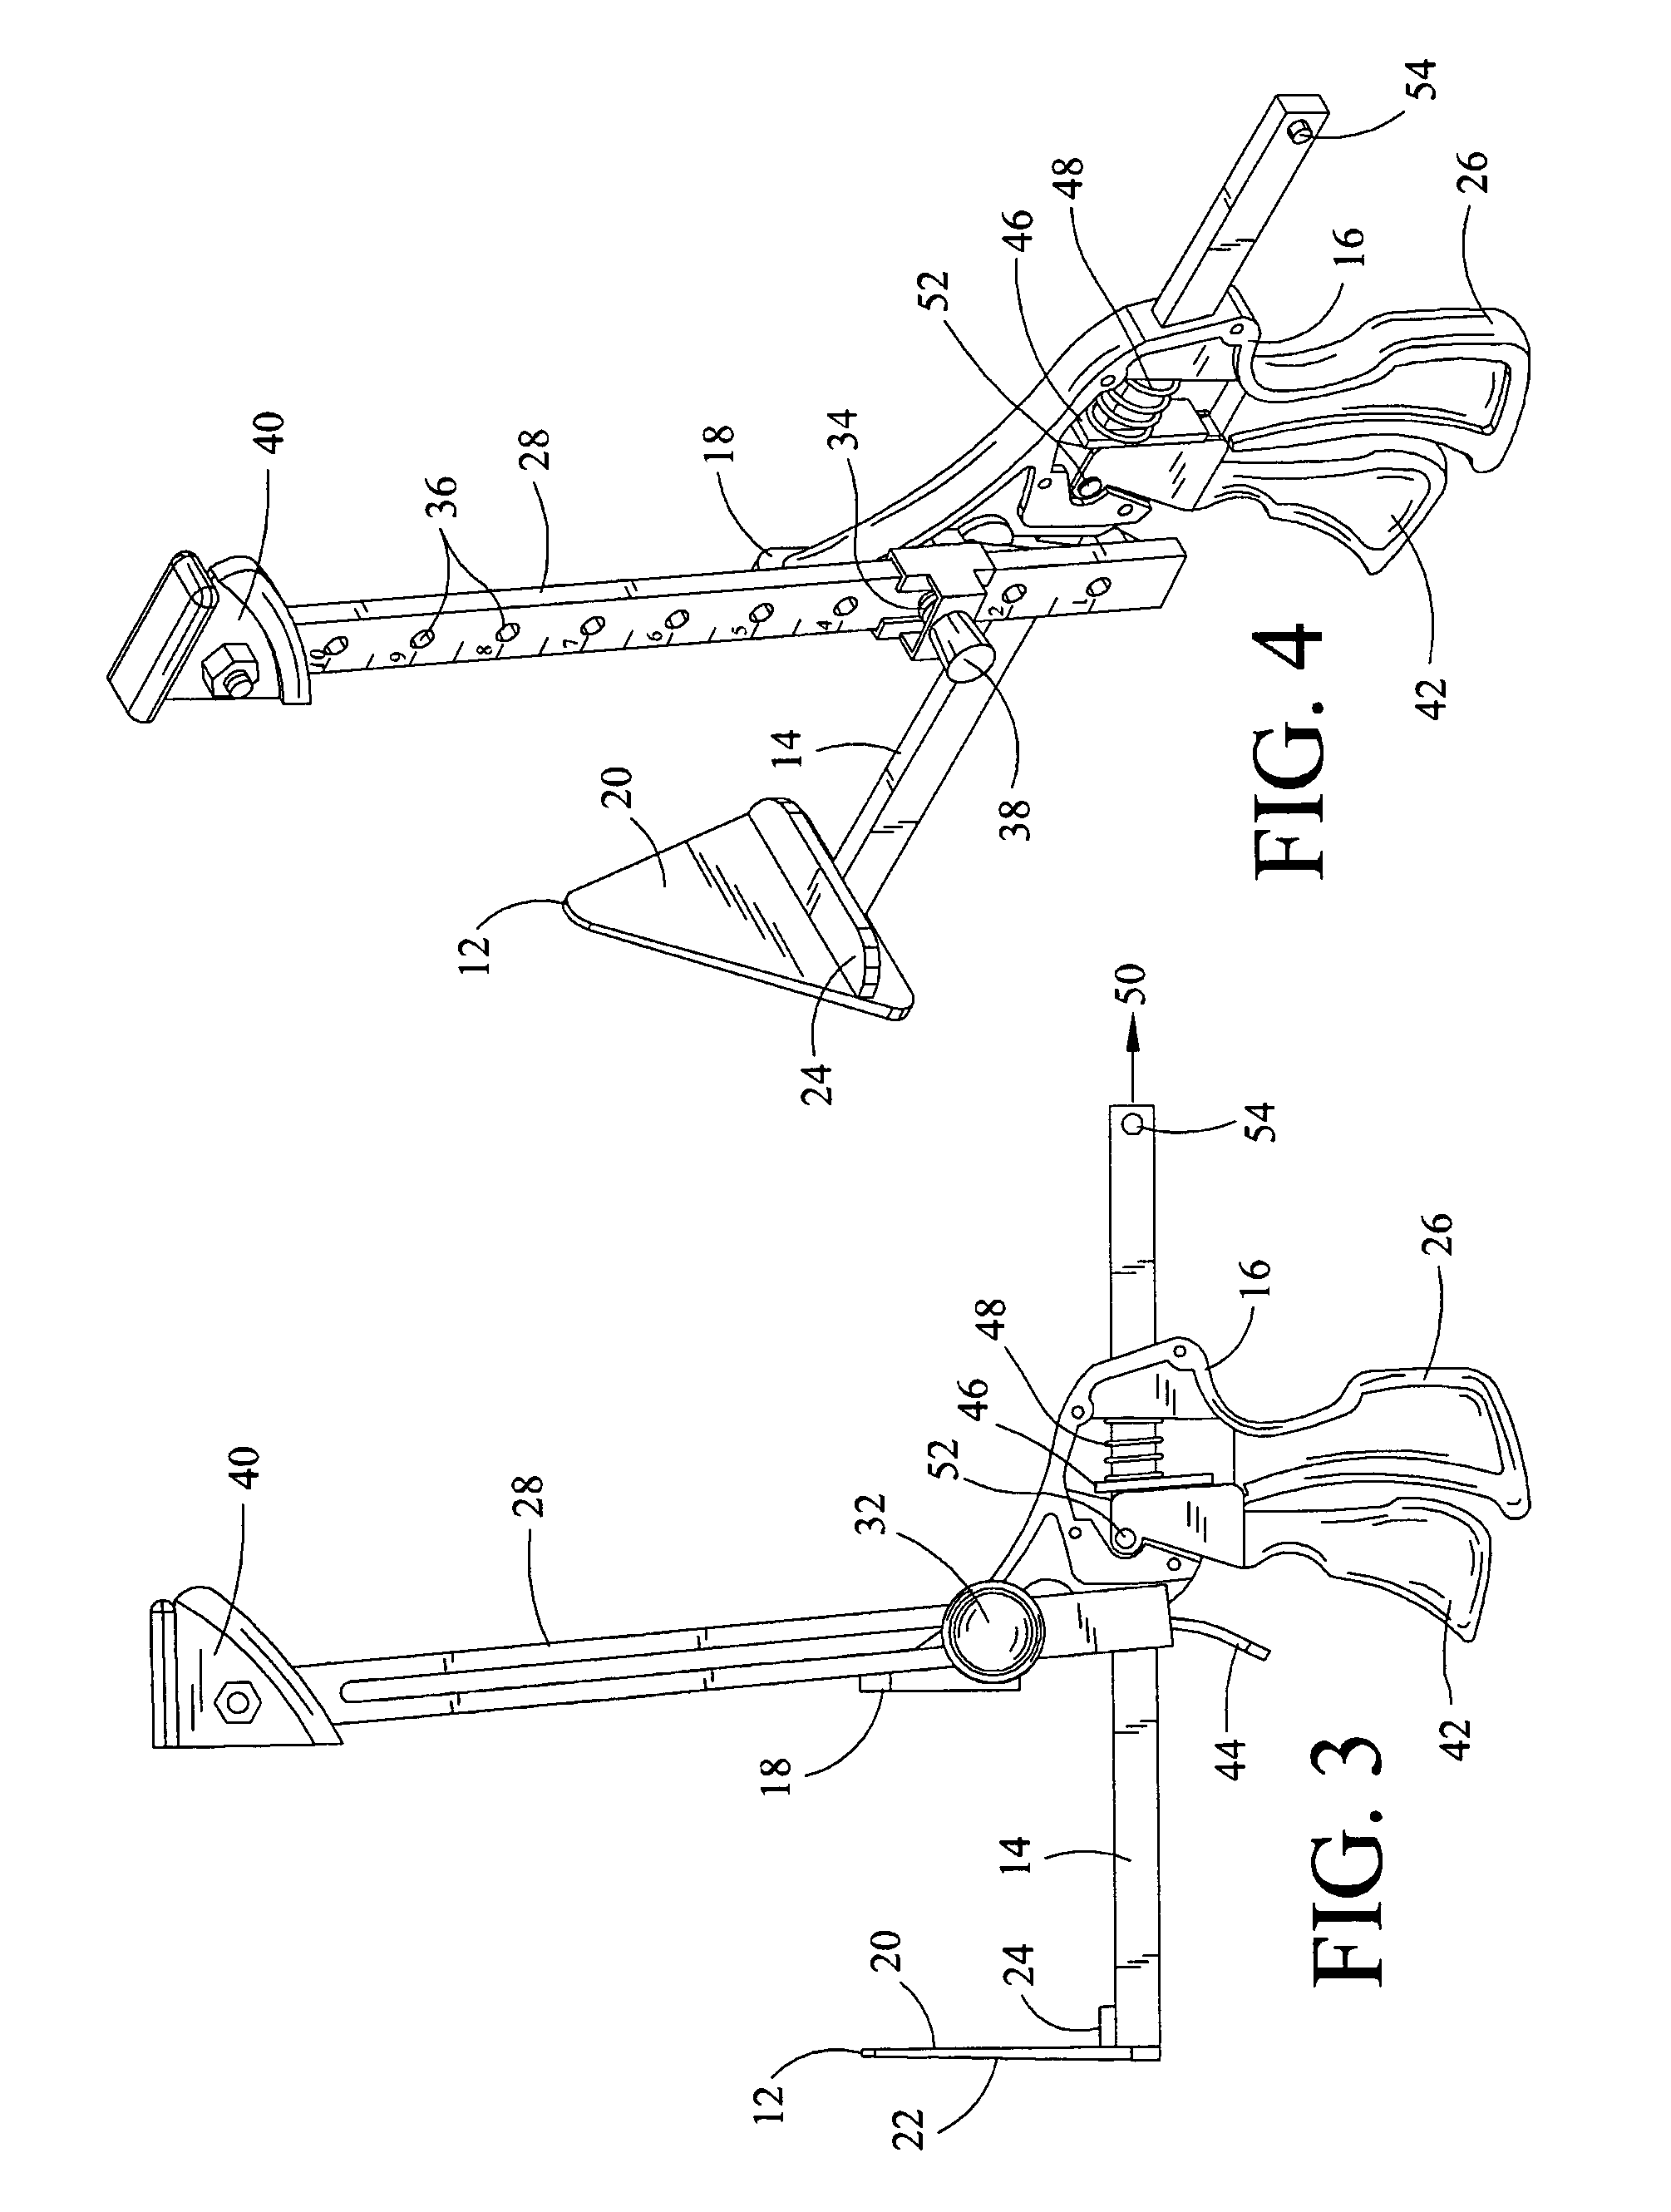 Hand tool apparatus and method